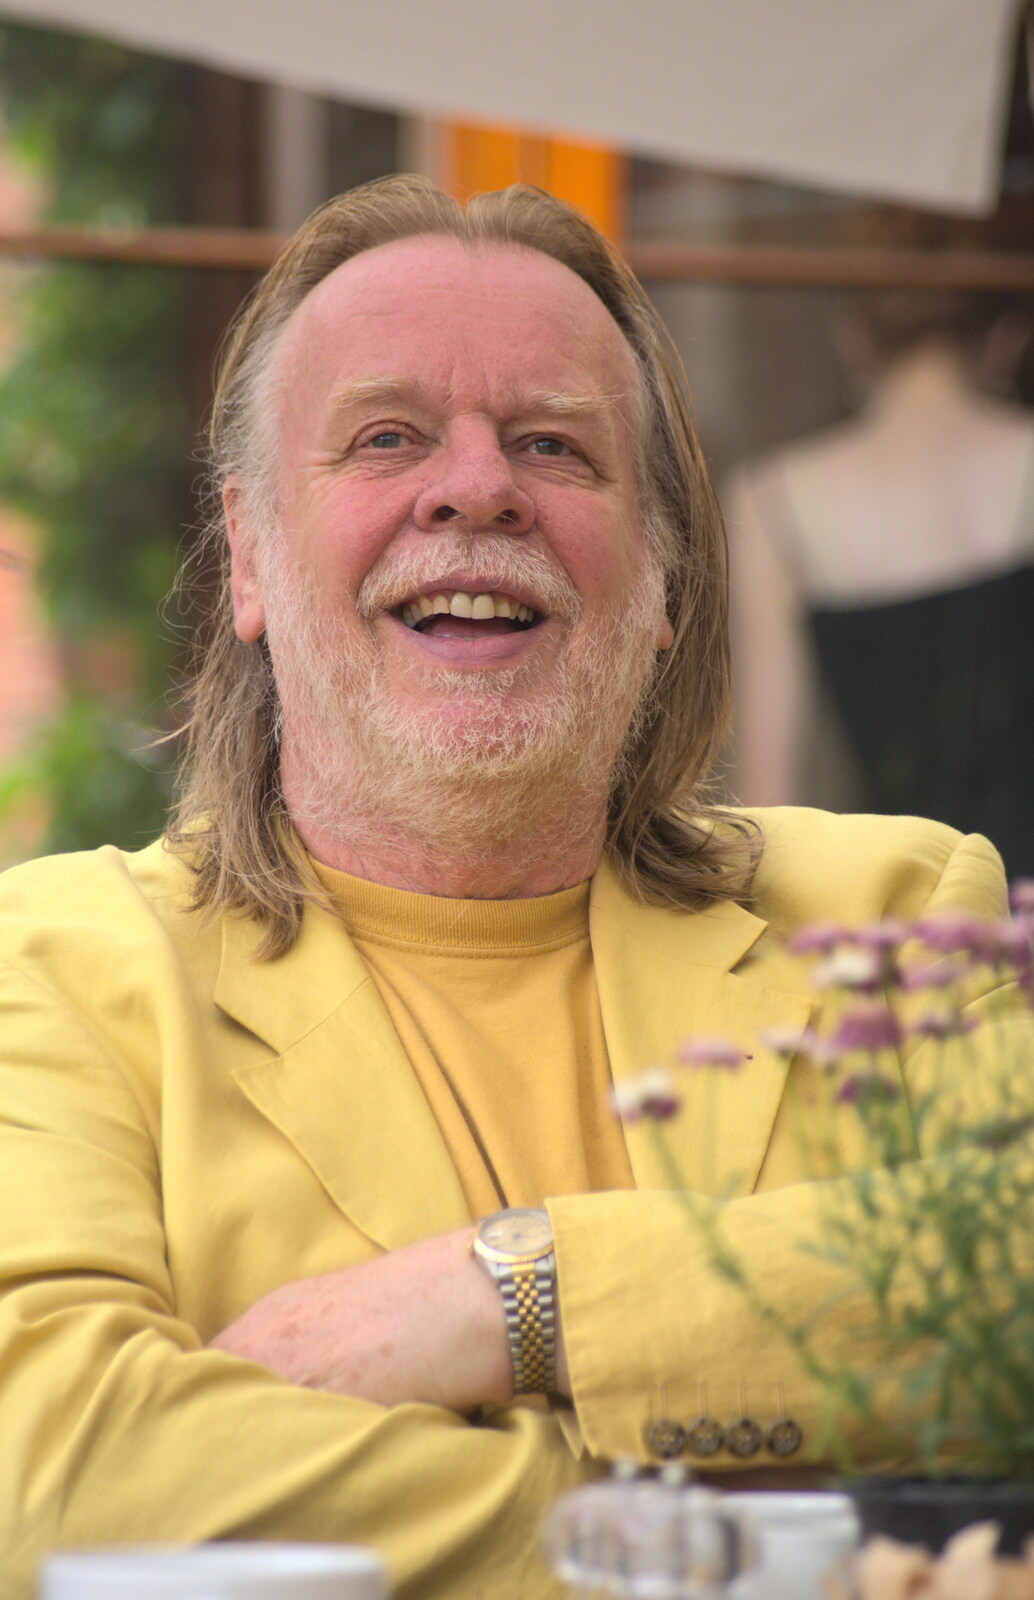 Rick Wakeman is definitely not a 'grumpy old man' from An Interview with Rick Wakeman and Other Stories, Diss, Norfolk - 22nd July 2013